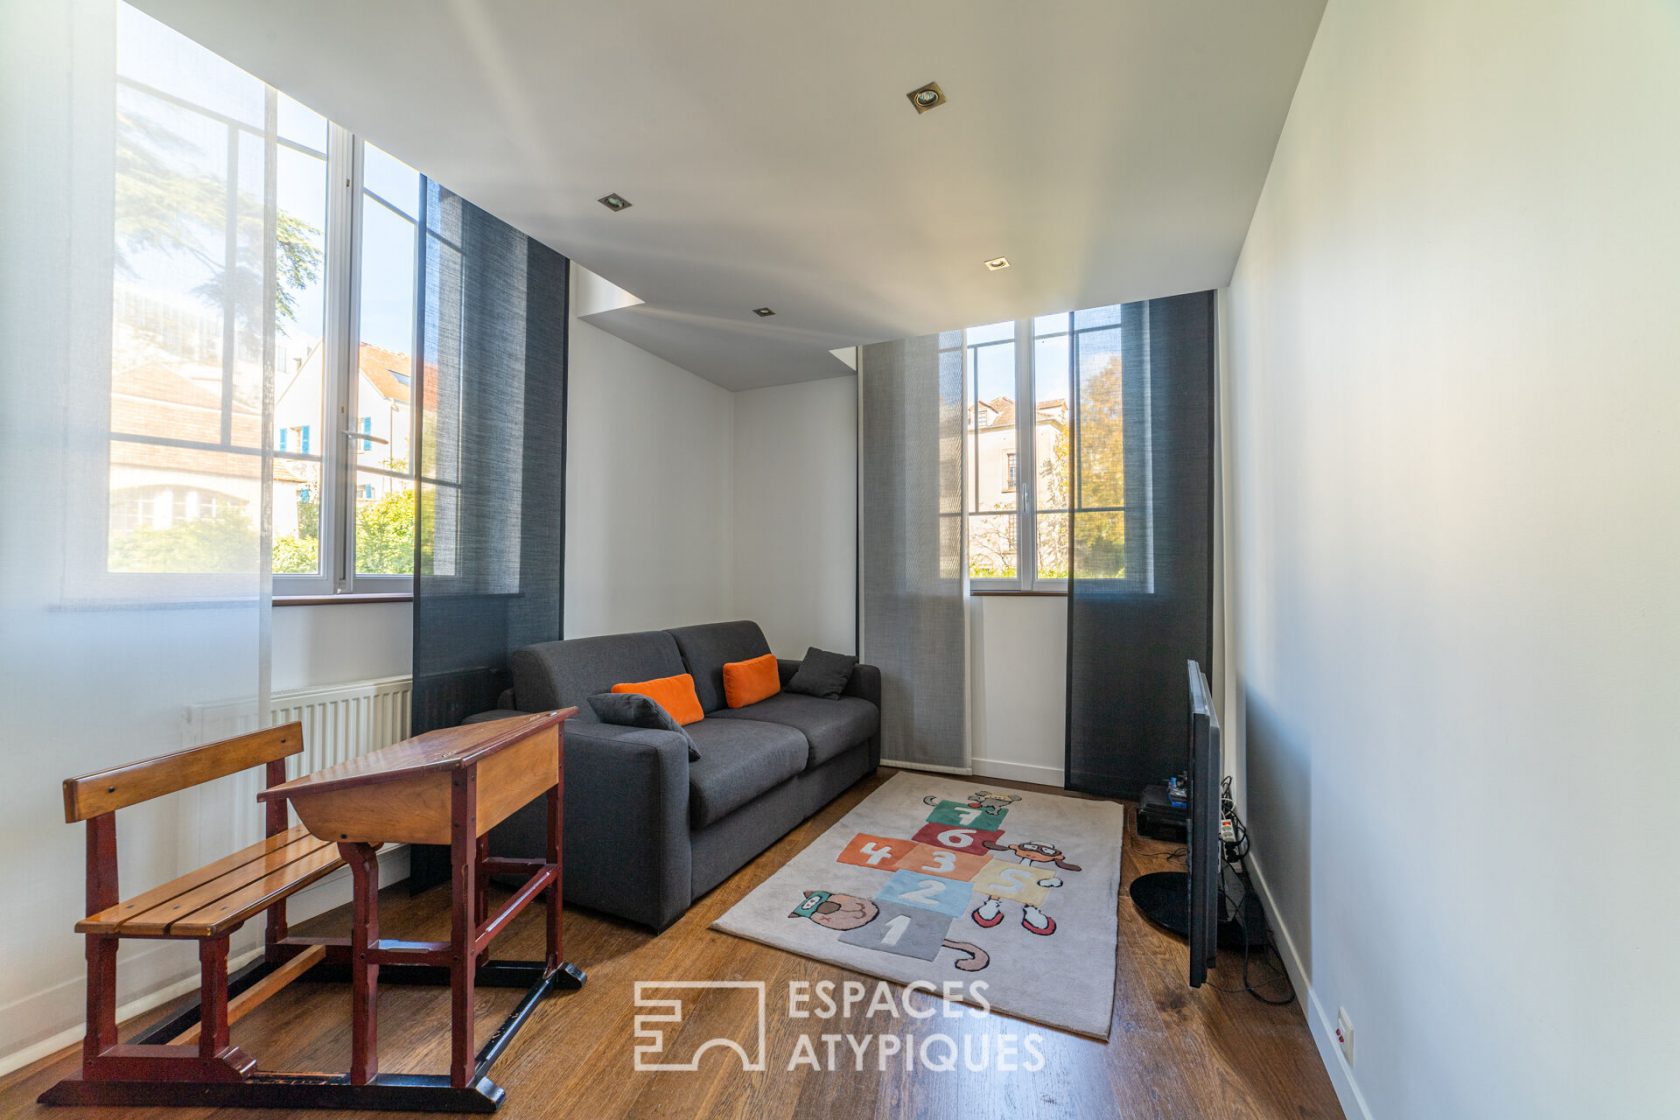 Le Sublime – Apartment in downtown Montmorency of 160 m²